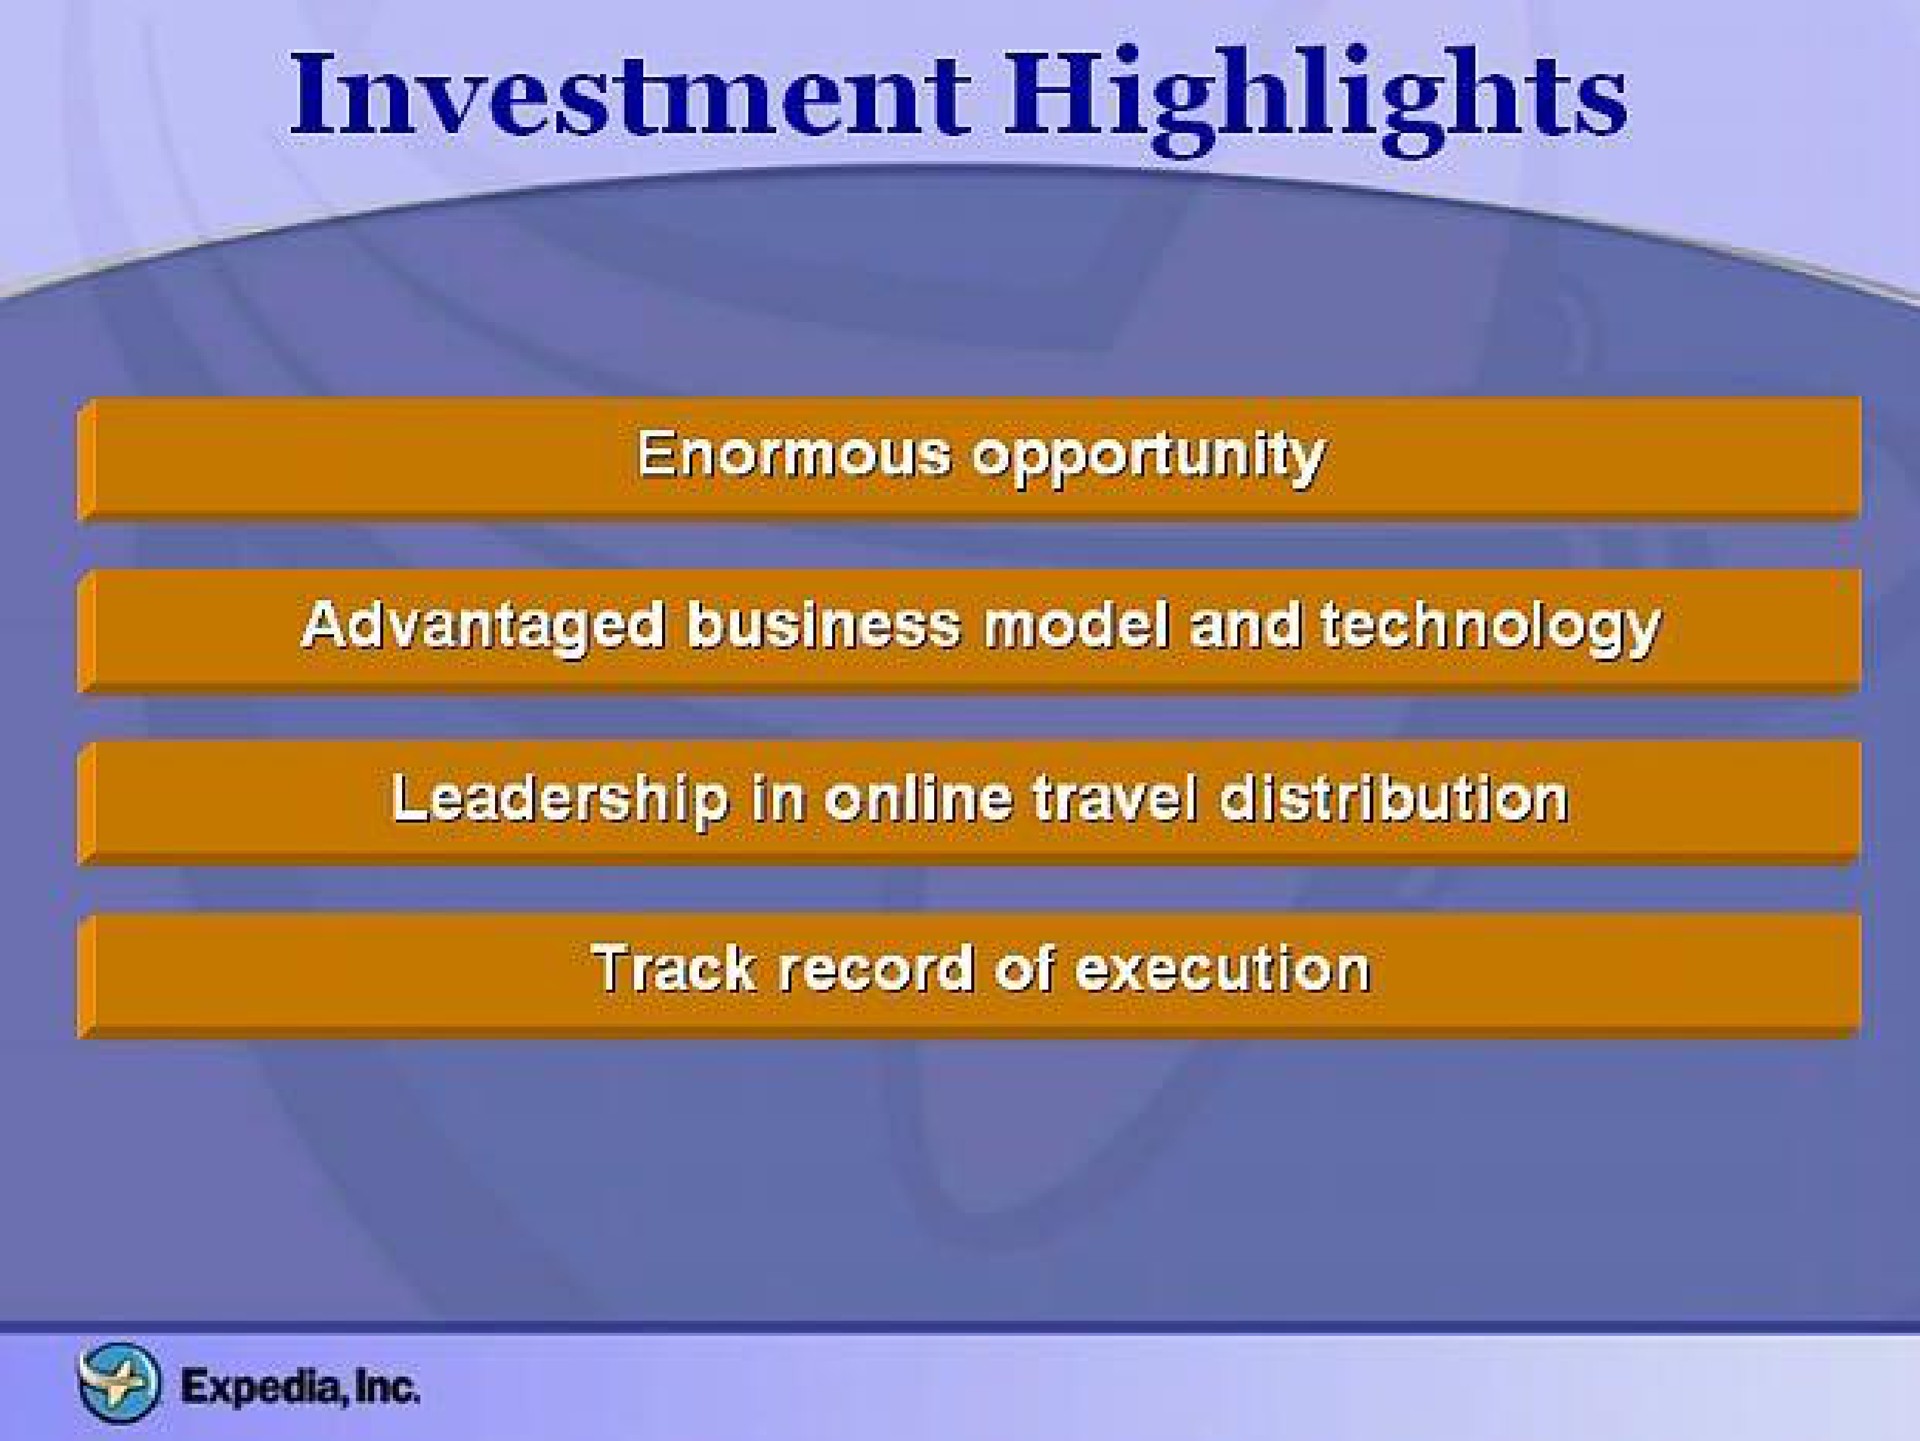 investment highlights enormous opportunity advantaged business model and technology leadership in travel distribution track record of execution | Expedia